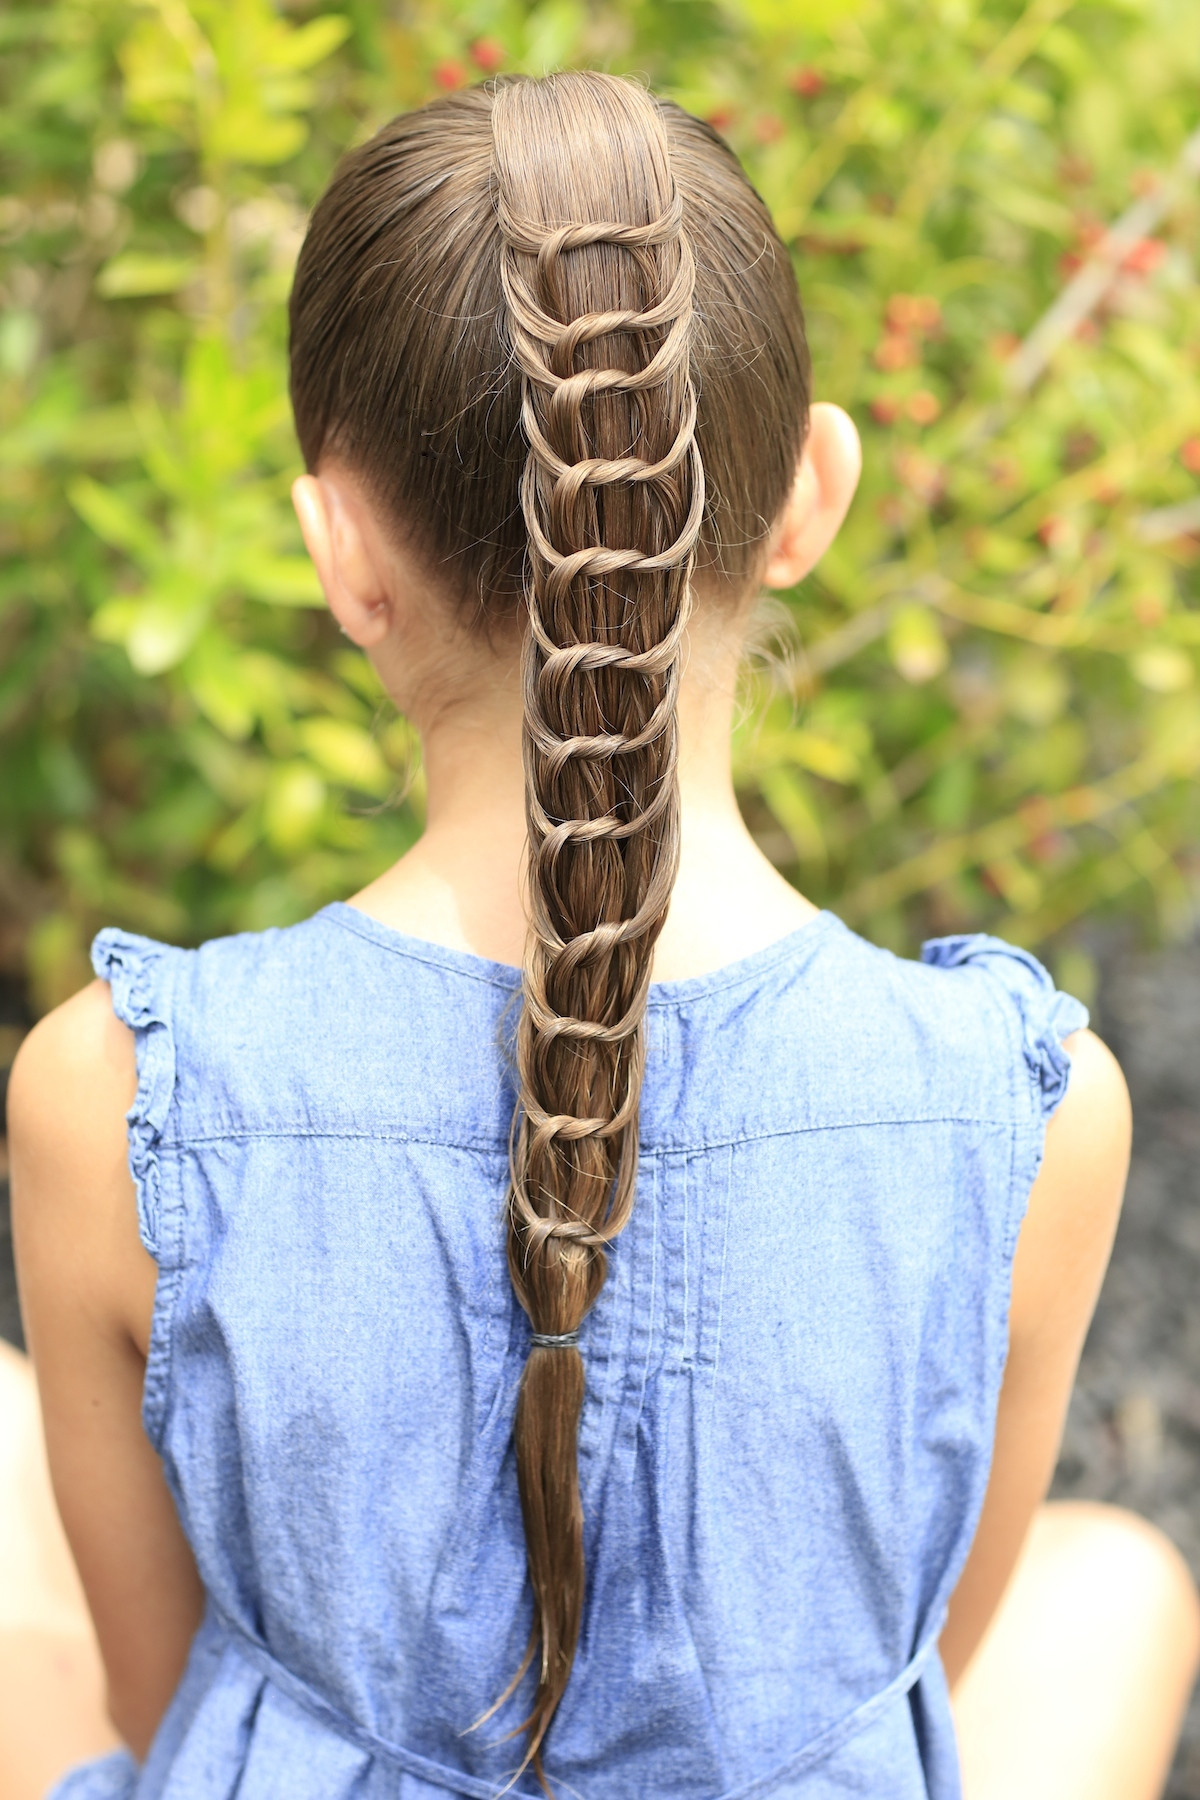 Cute Ponytail Hairstyles For Little Girls
 The Knotted Ponytail Hairstyles for Girls